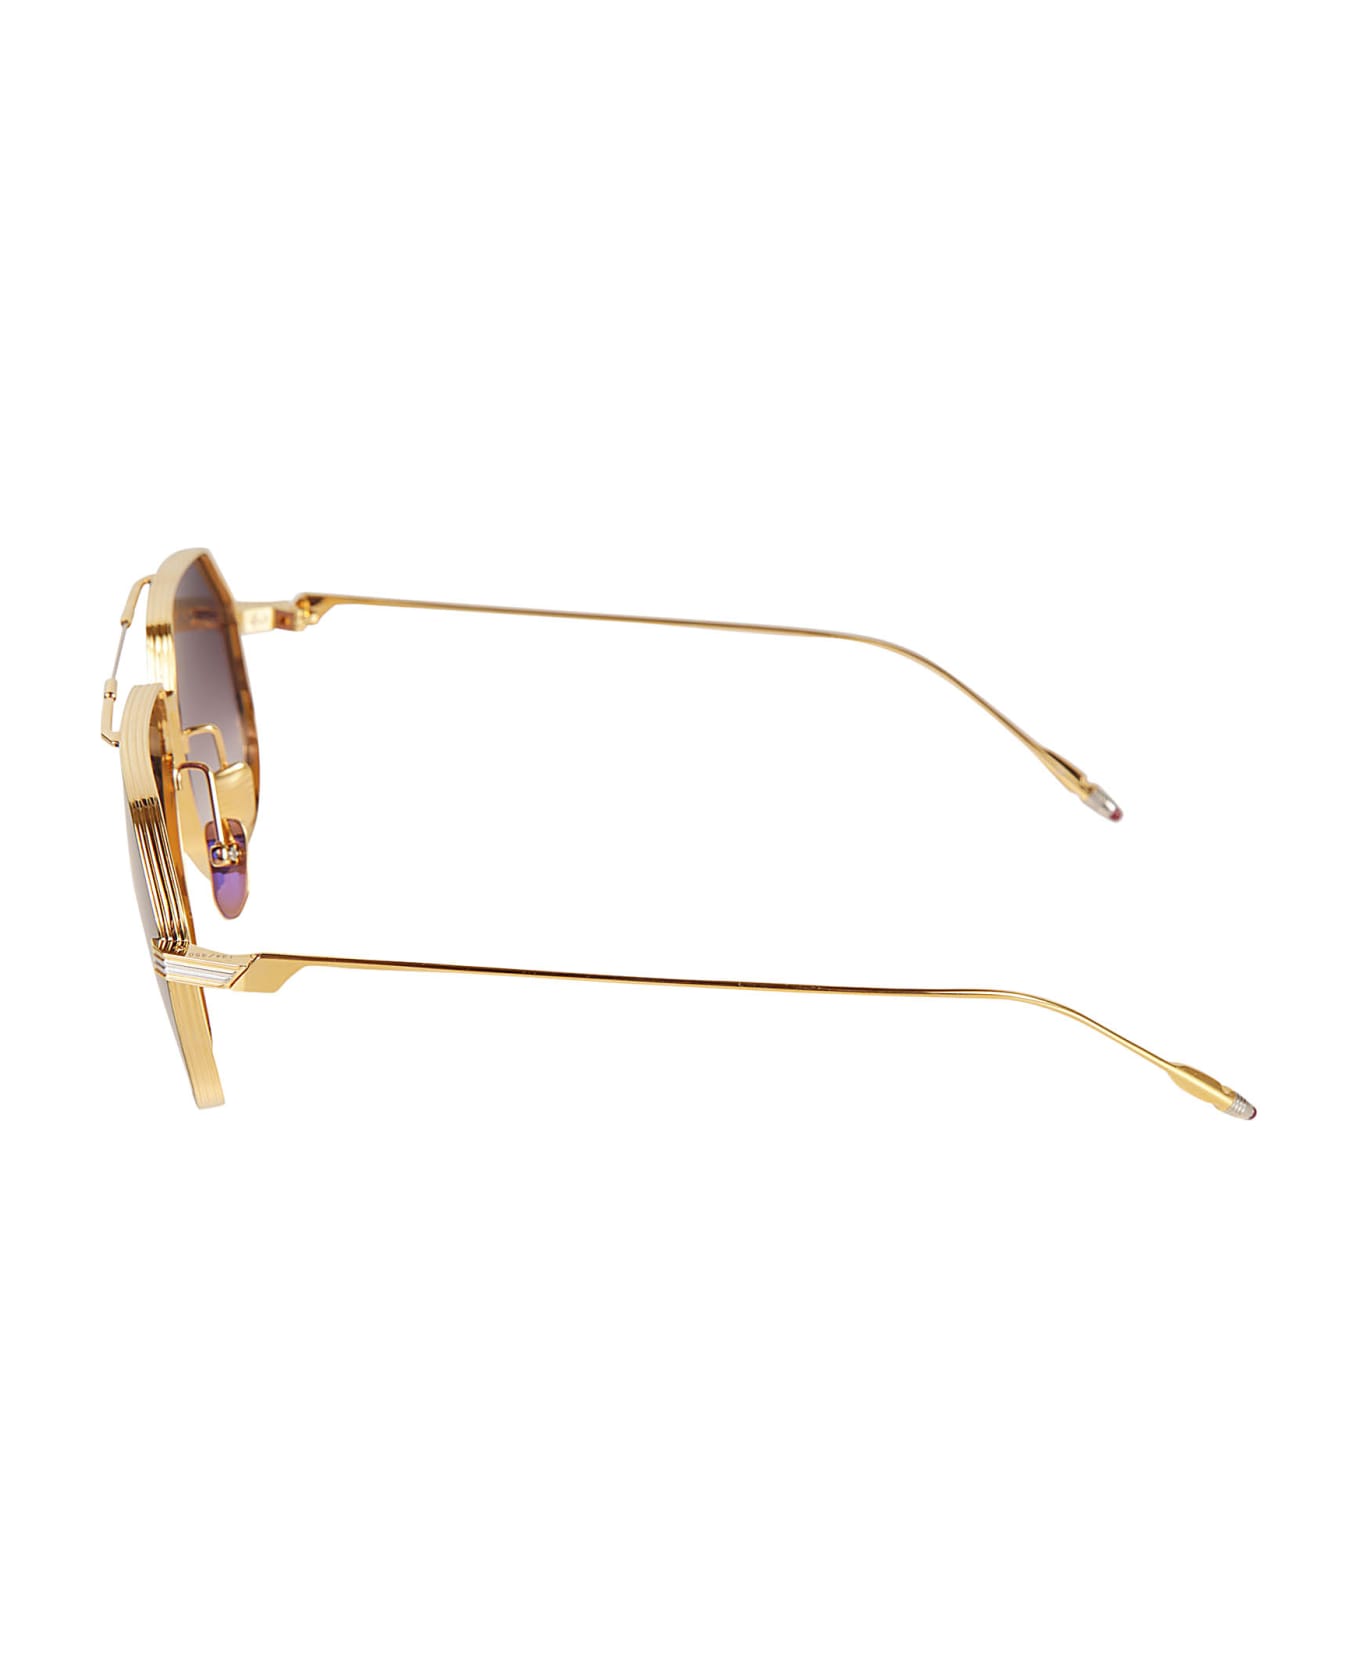 Jacques Marie Mage Reynold Sunglasses - medallion